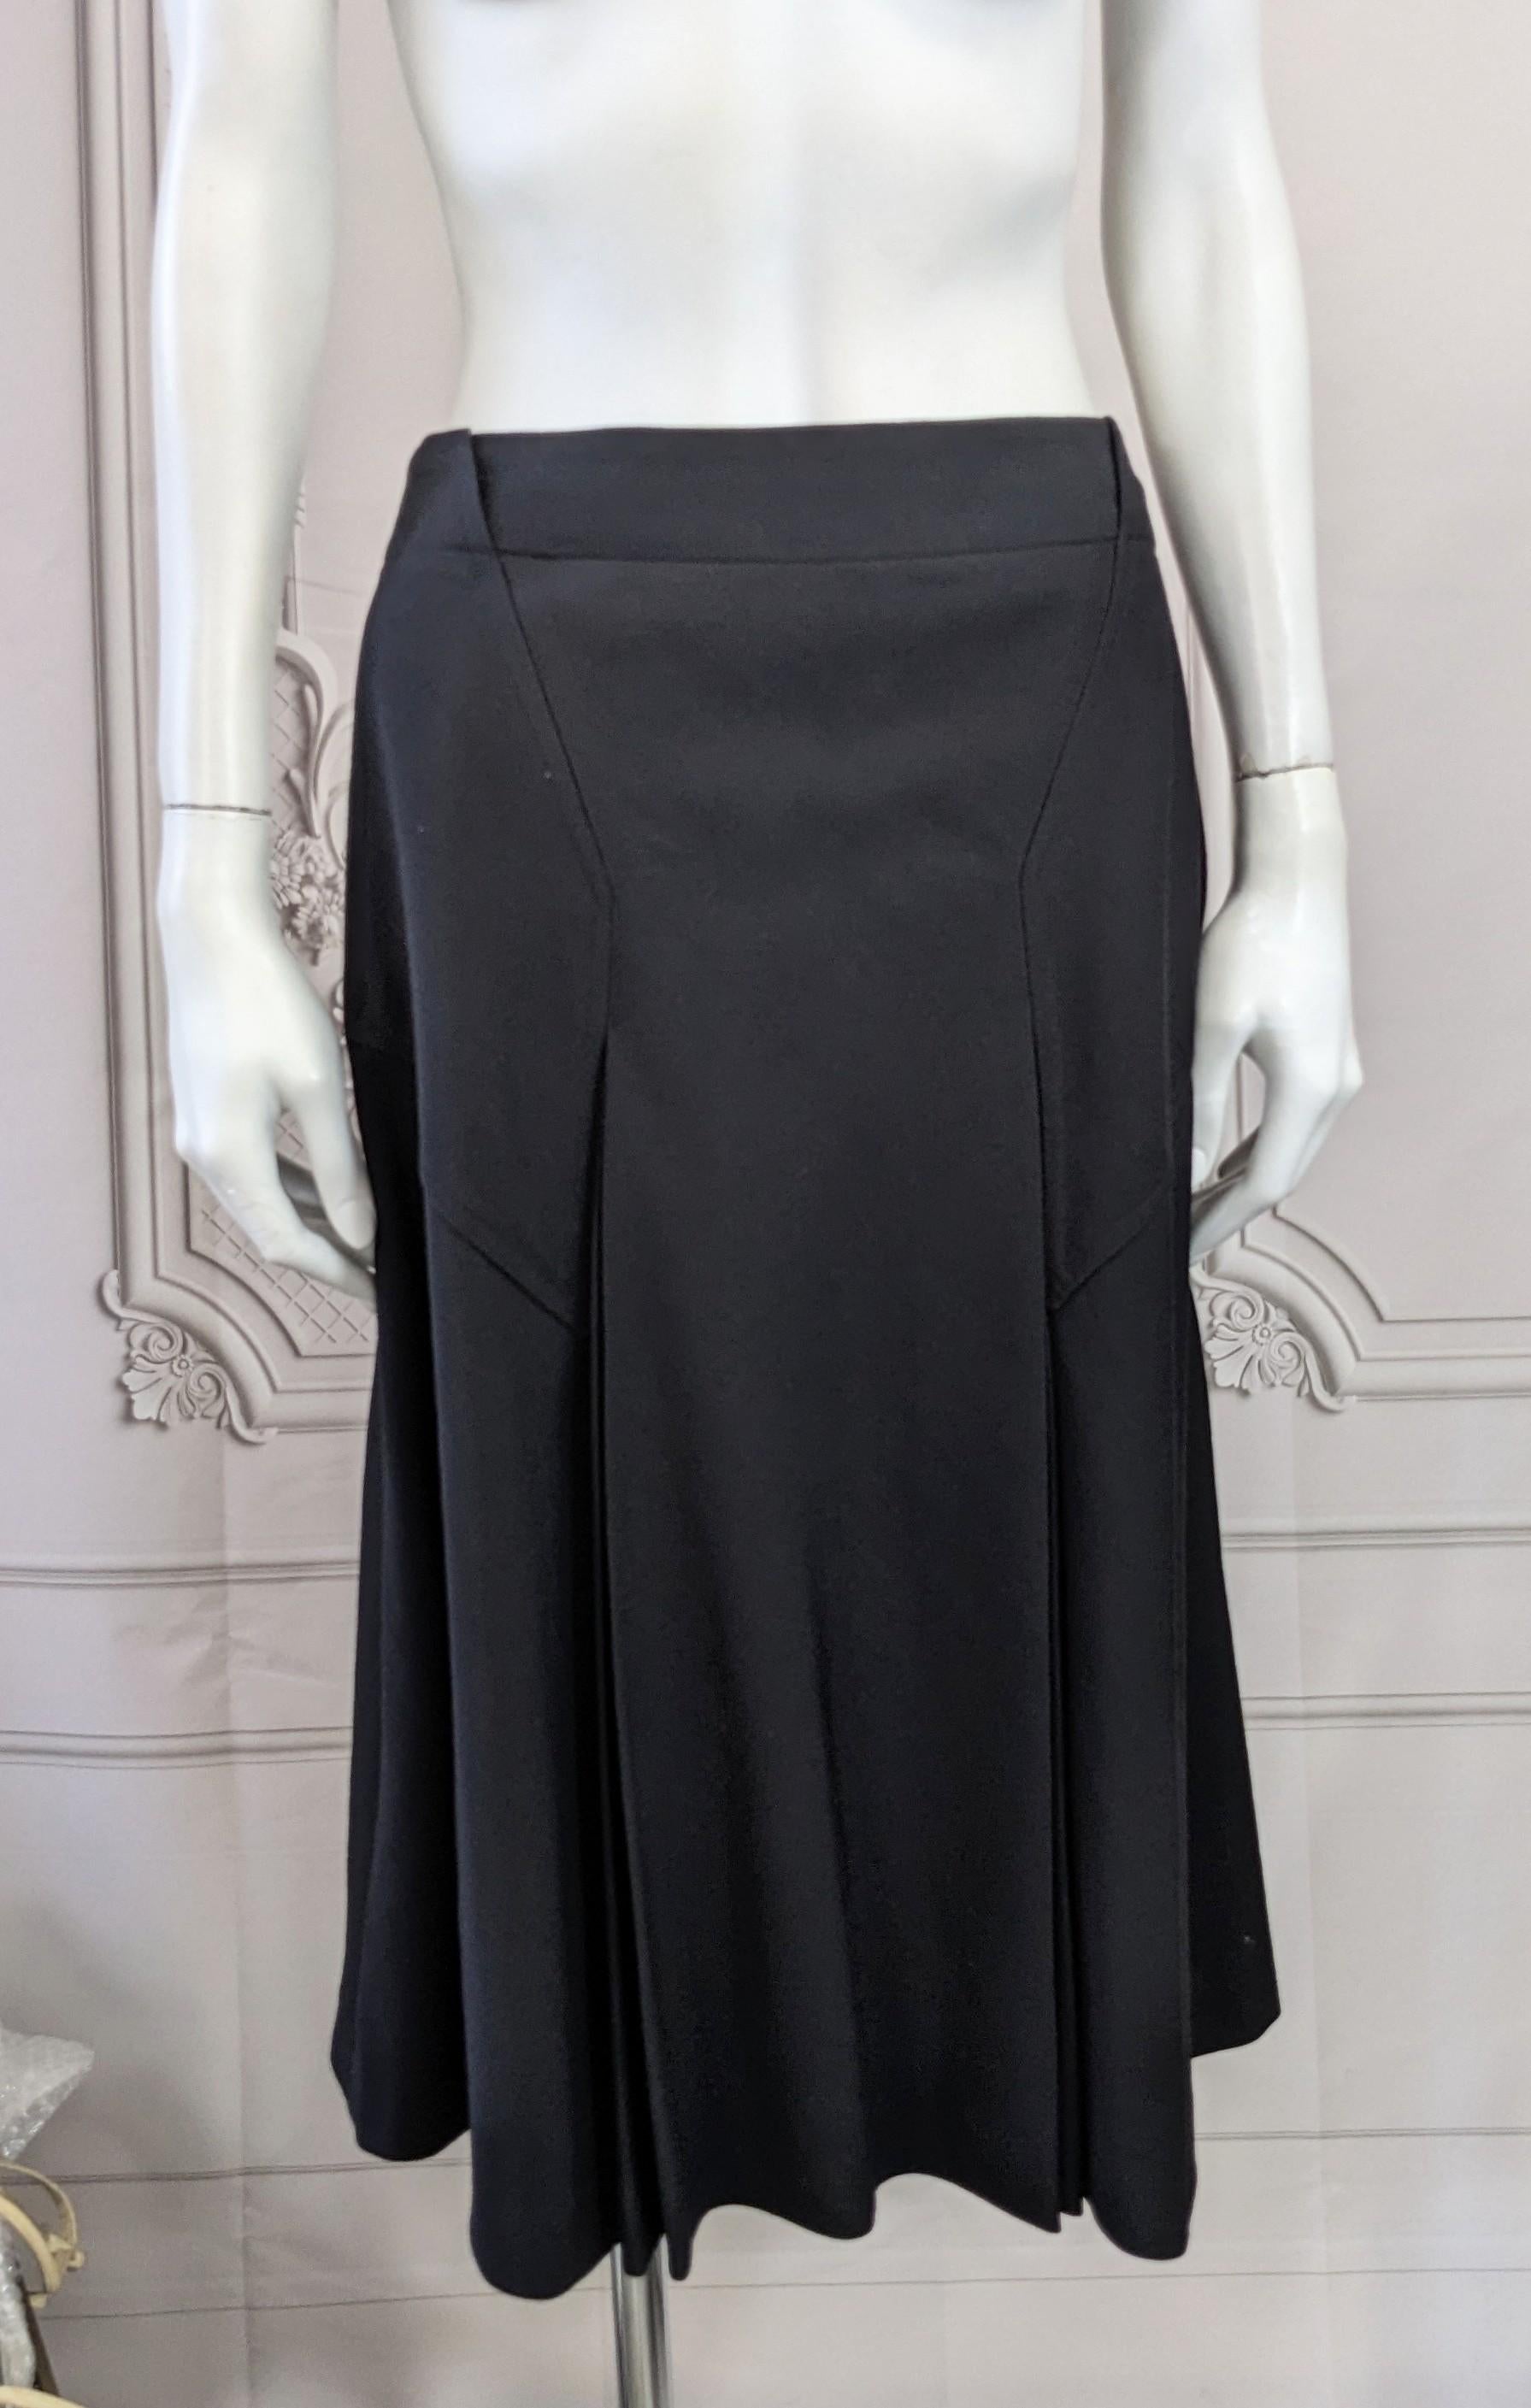 Cacharel Black Wool Twill Pleated A Line Skirt from the 1970's. Great cut and detailing with cool angled panels and pockets. Panels release into double pleats on front and back. Side zip entry. Great design. 1970's France. Small size. Vintage size